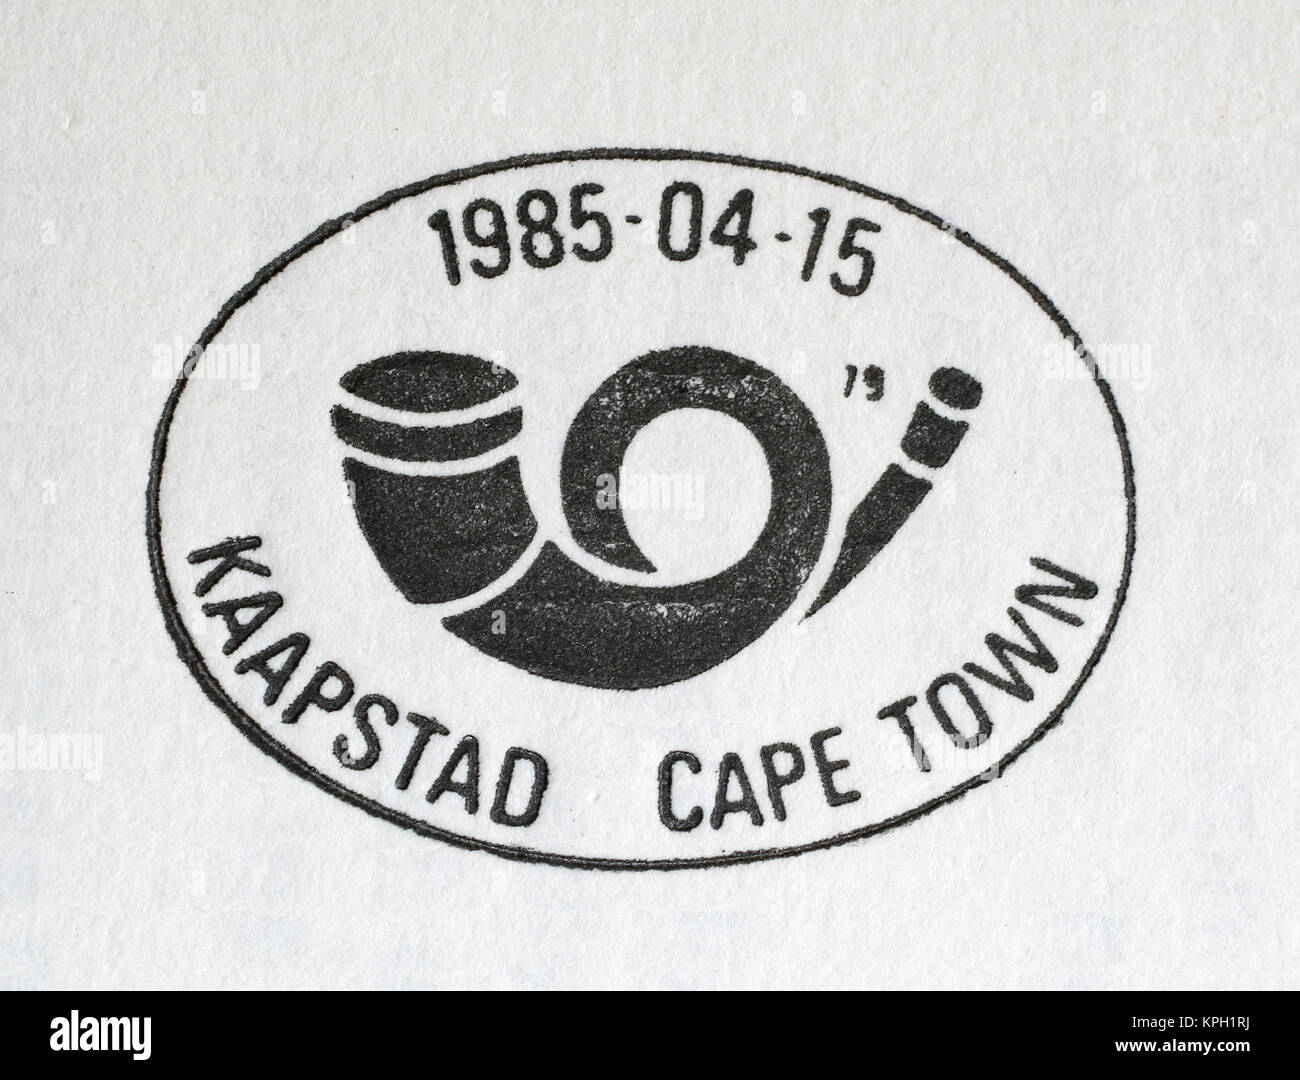 Cape Town postage stamp from 15 April1985, Western Cape Province, South Africa. Stock Photo